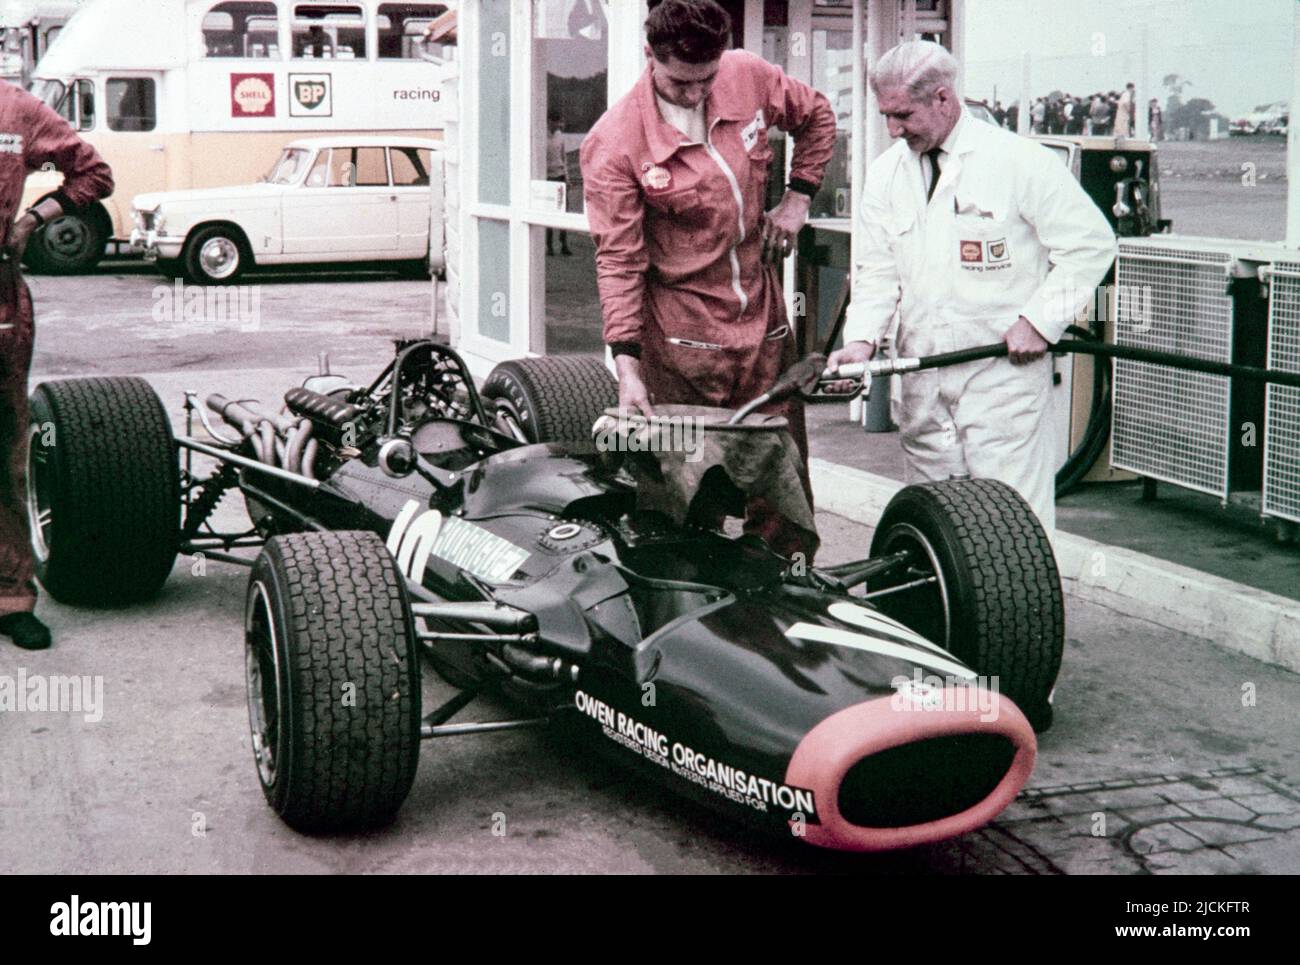 1968 British Formula 1 Grand Prix at Brands Hatch. The Owen Racing BRM P133, race number 10, driven by Pedro Rodriquez by refuelled. Stock Photo